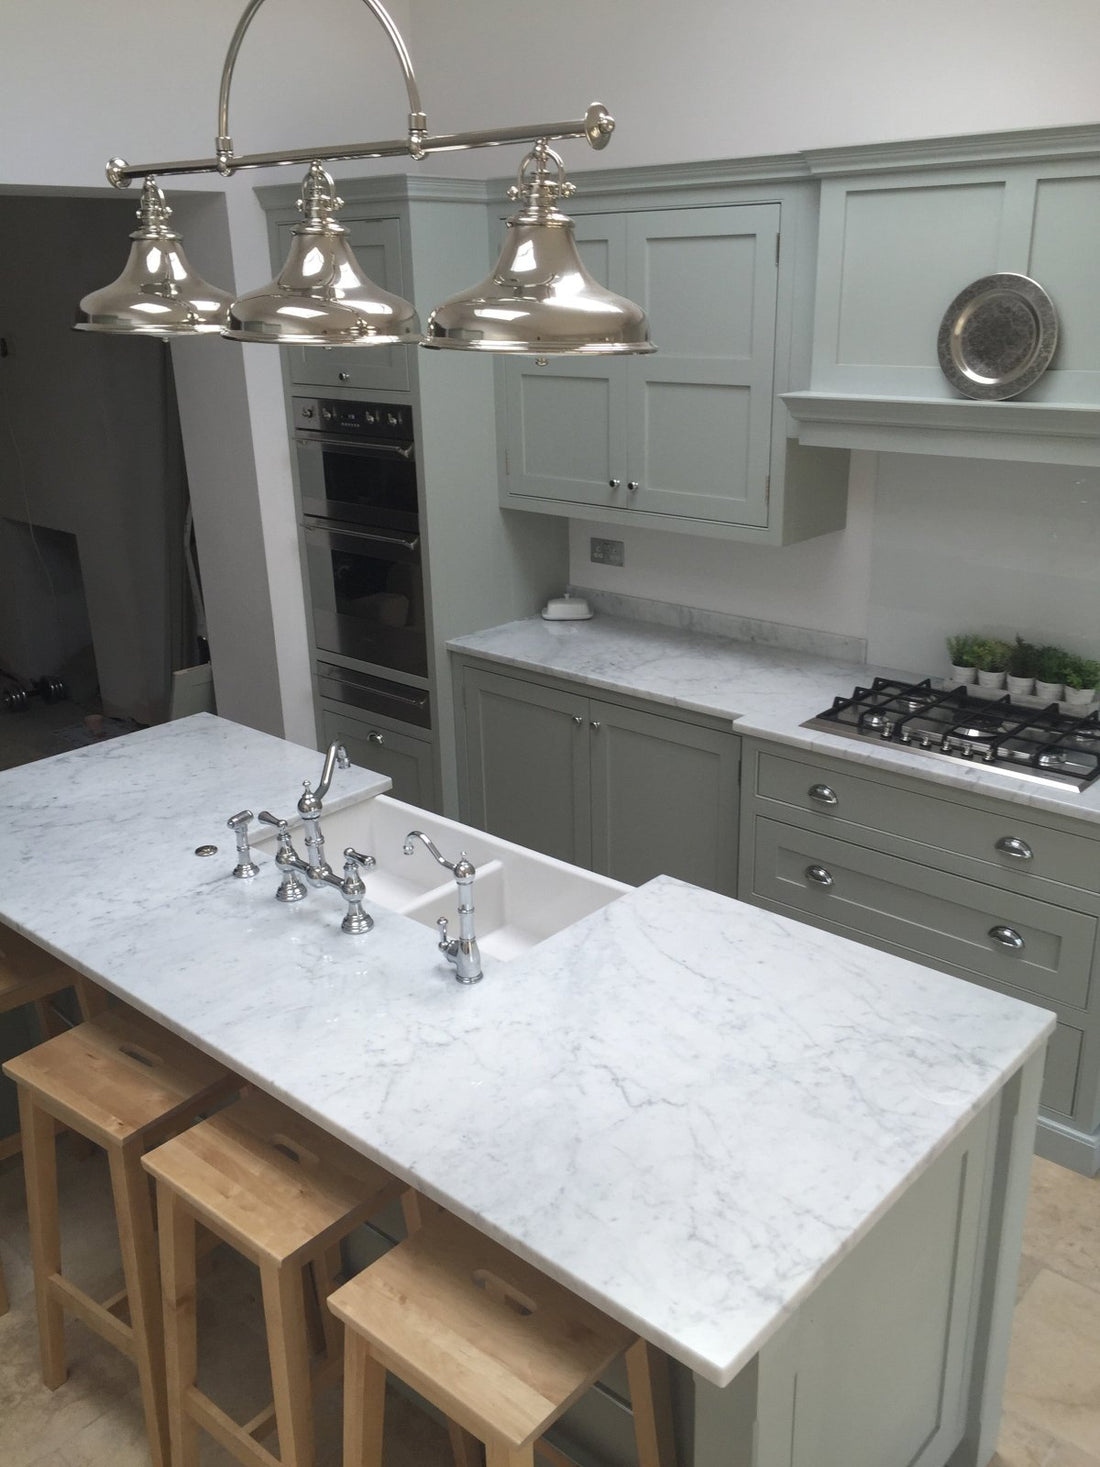 Choosing the right lighting for your kitchen - The Painted Kitchen Company Ltd